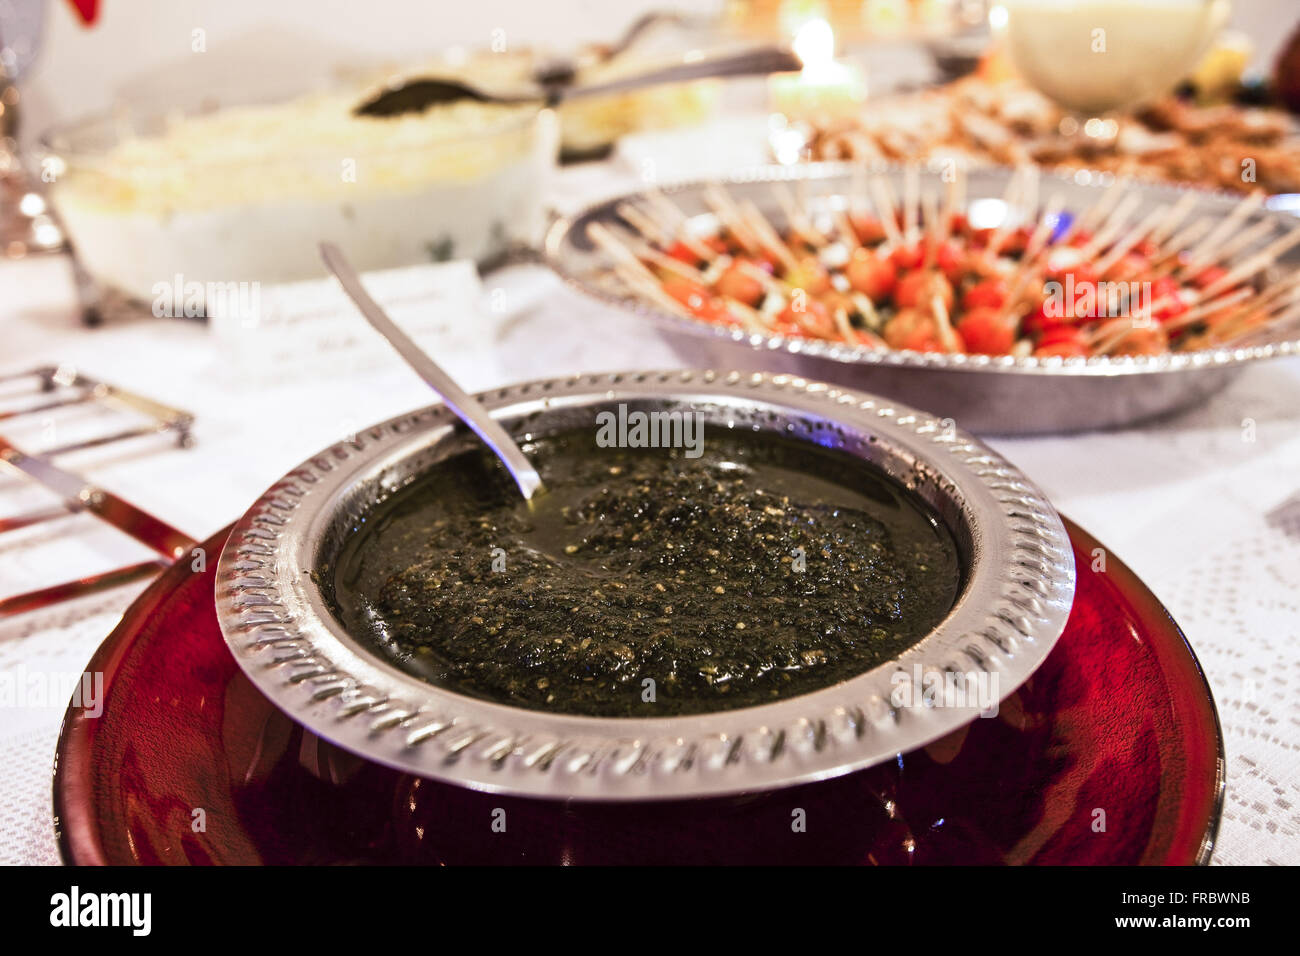 Sauce served for Christmas dinner in middle-class housing Stock Photo